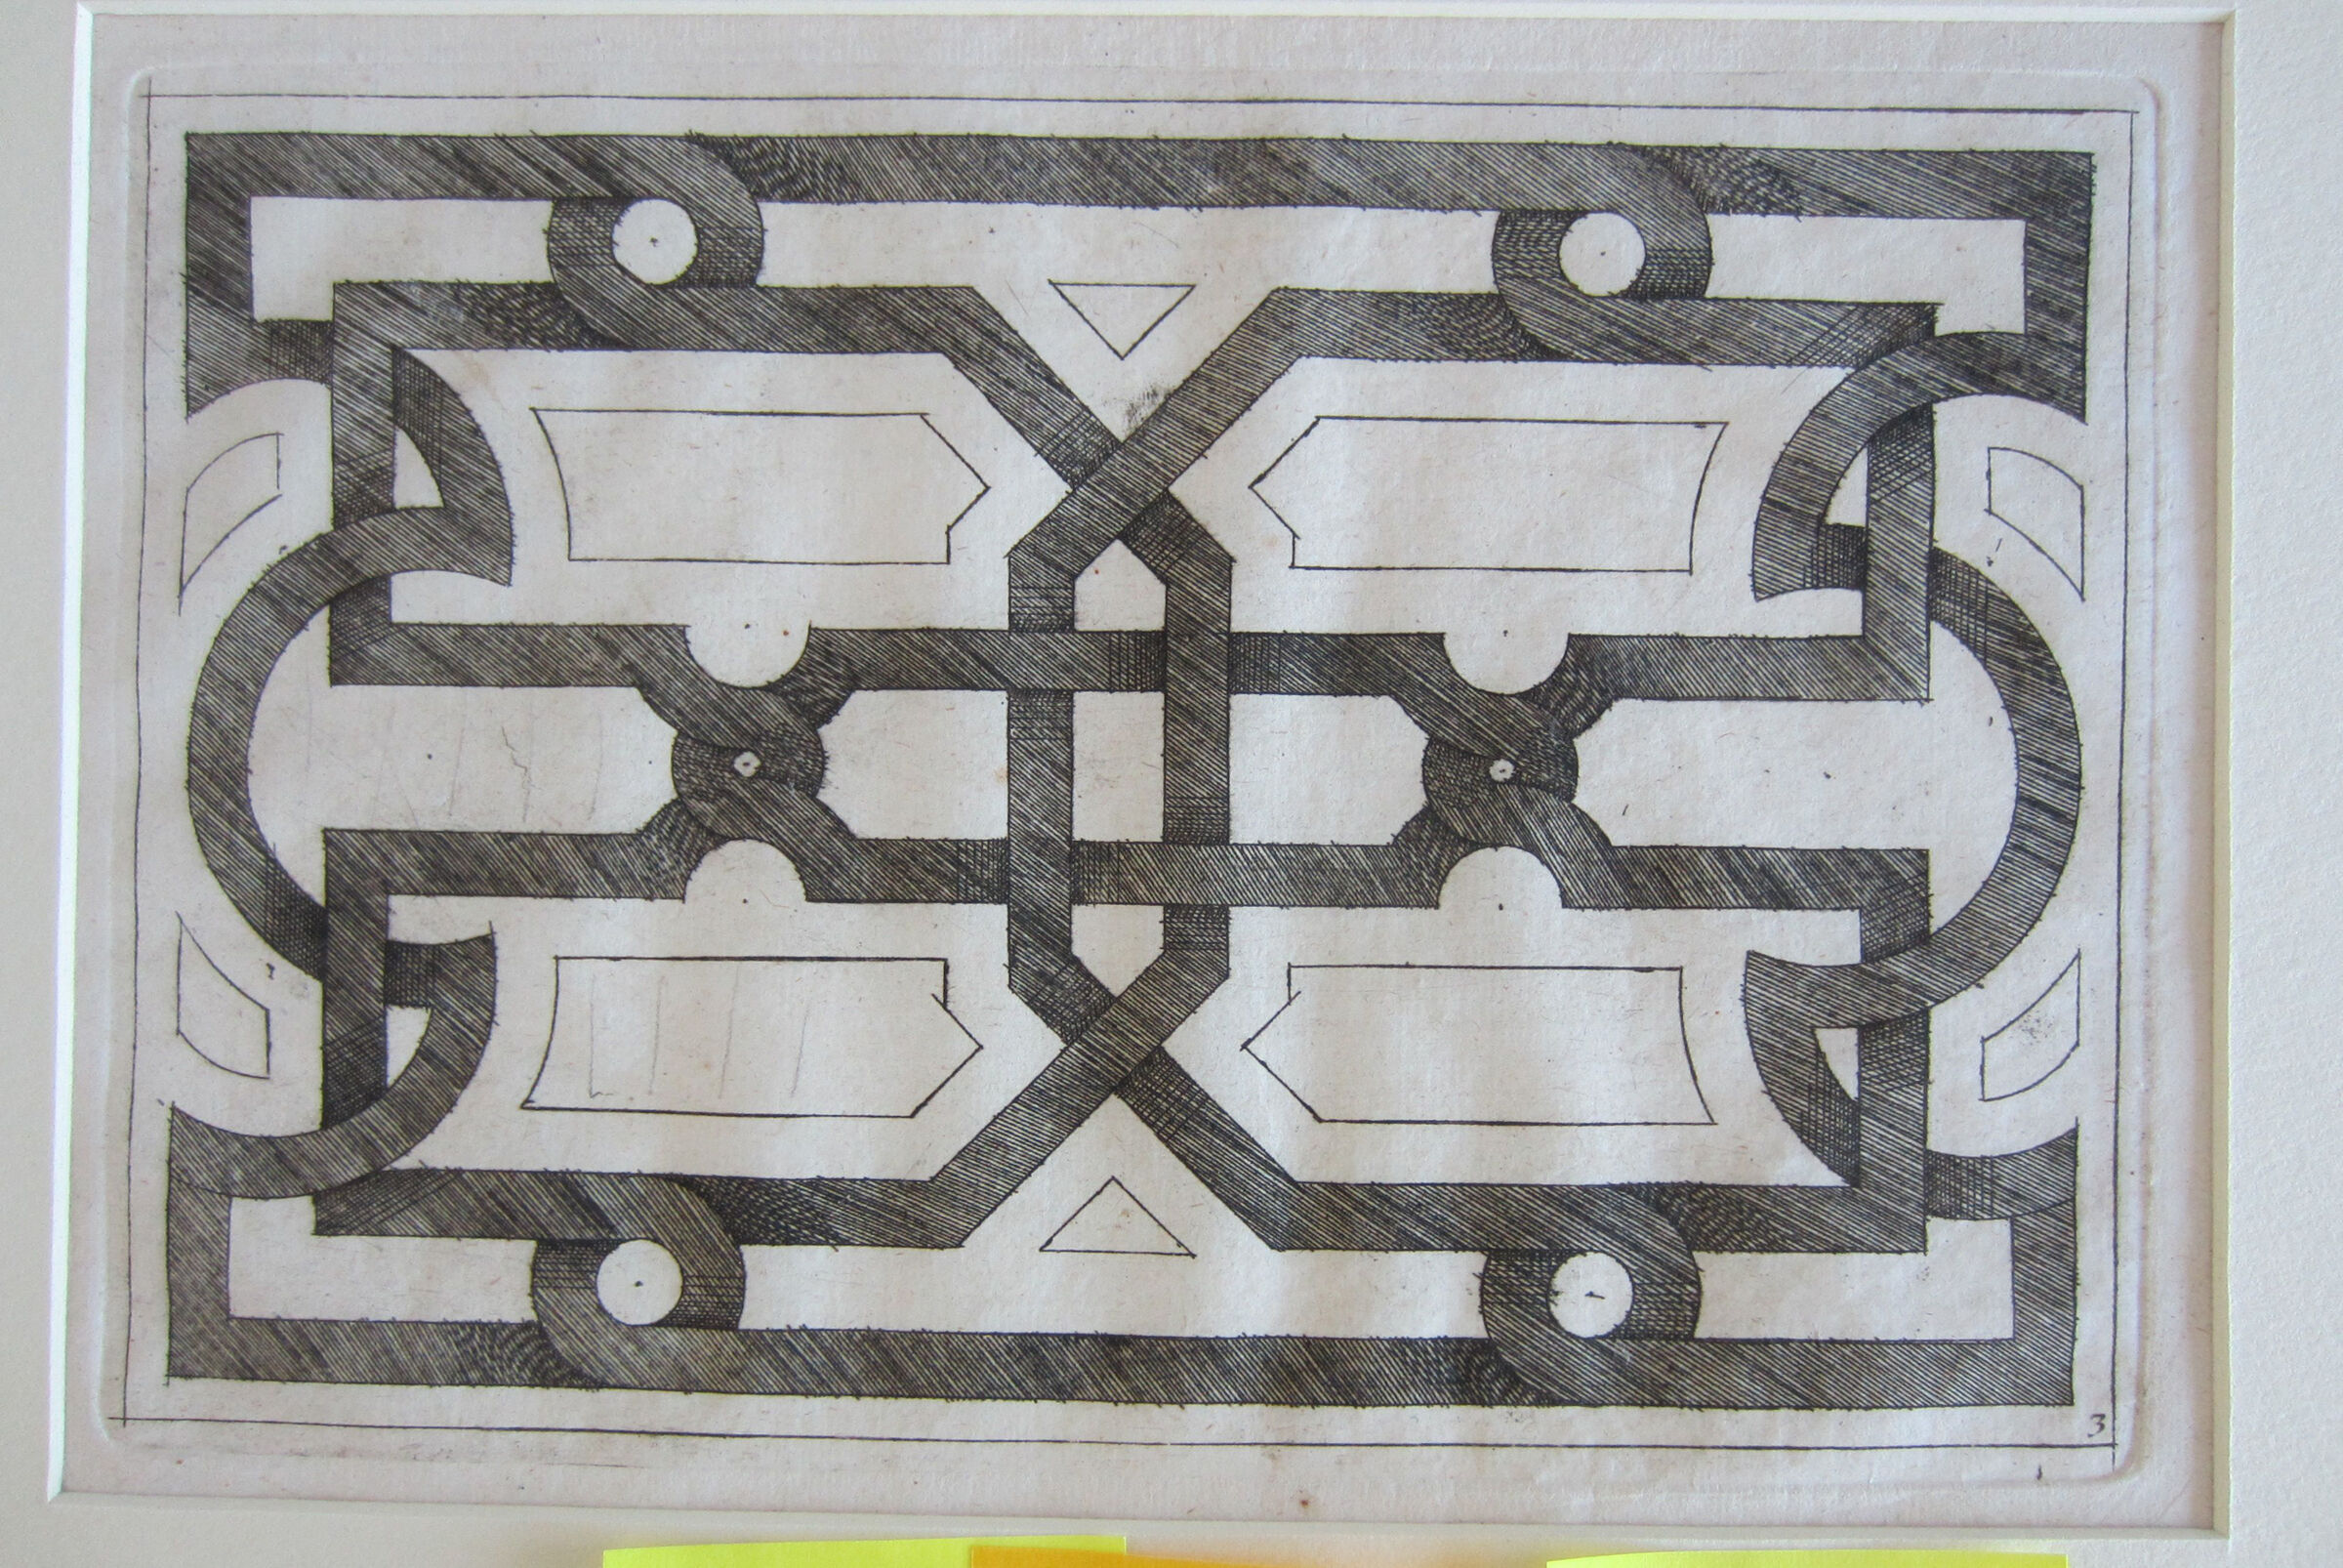 Interlace With Four Major And Six Minor Irregularly Shaped Outlined Reserves And An Outlined Border